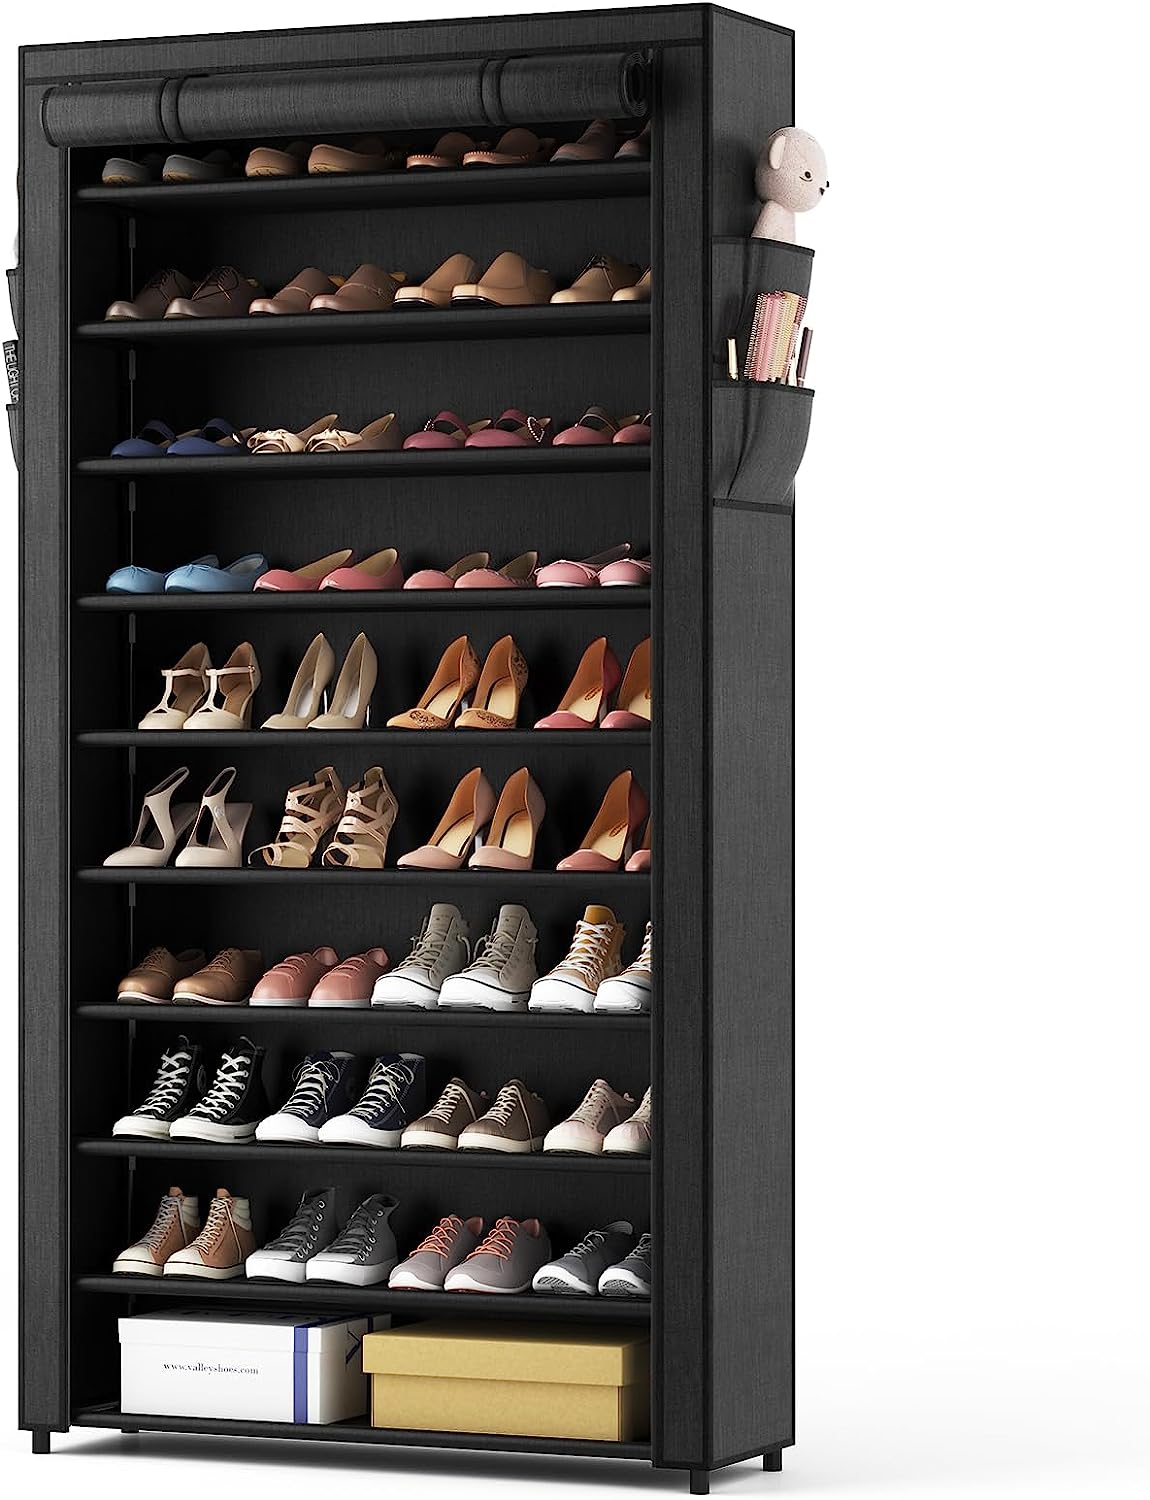 ROJASOP 10 Tier Shoe Rack with Covers,Large Capacity [...]